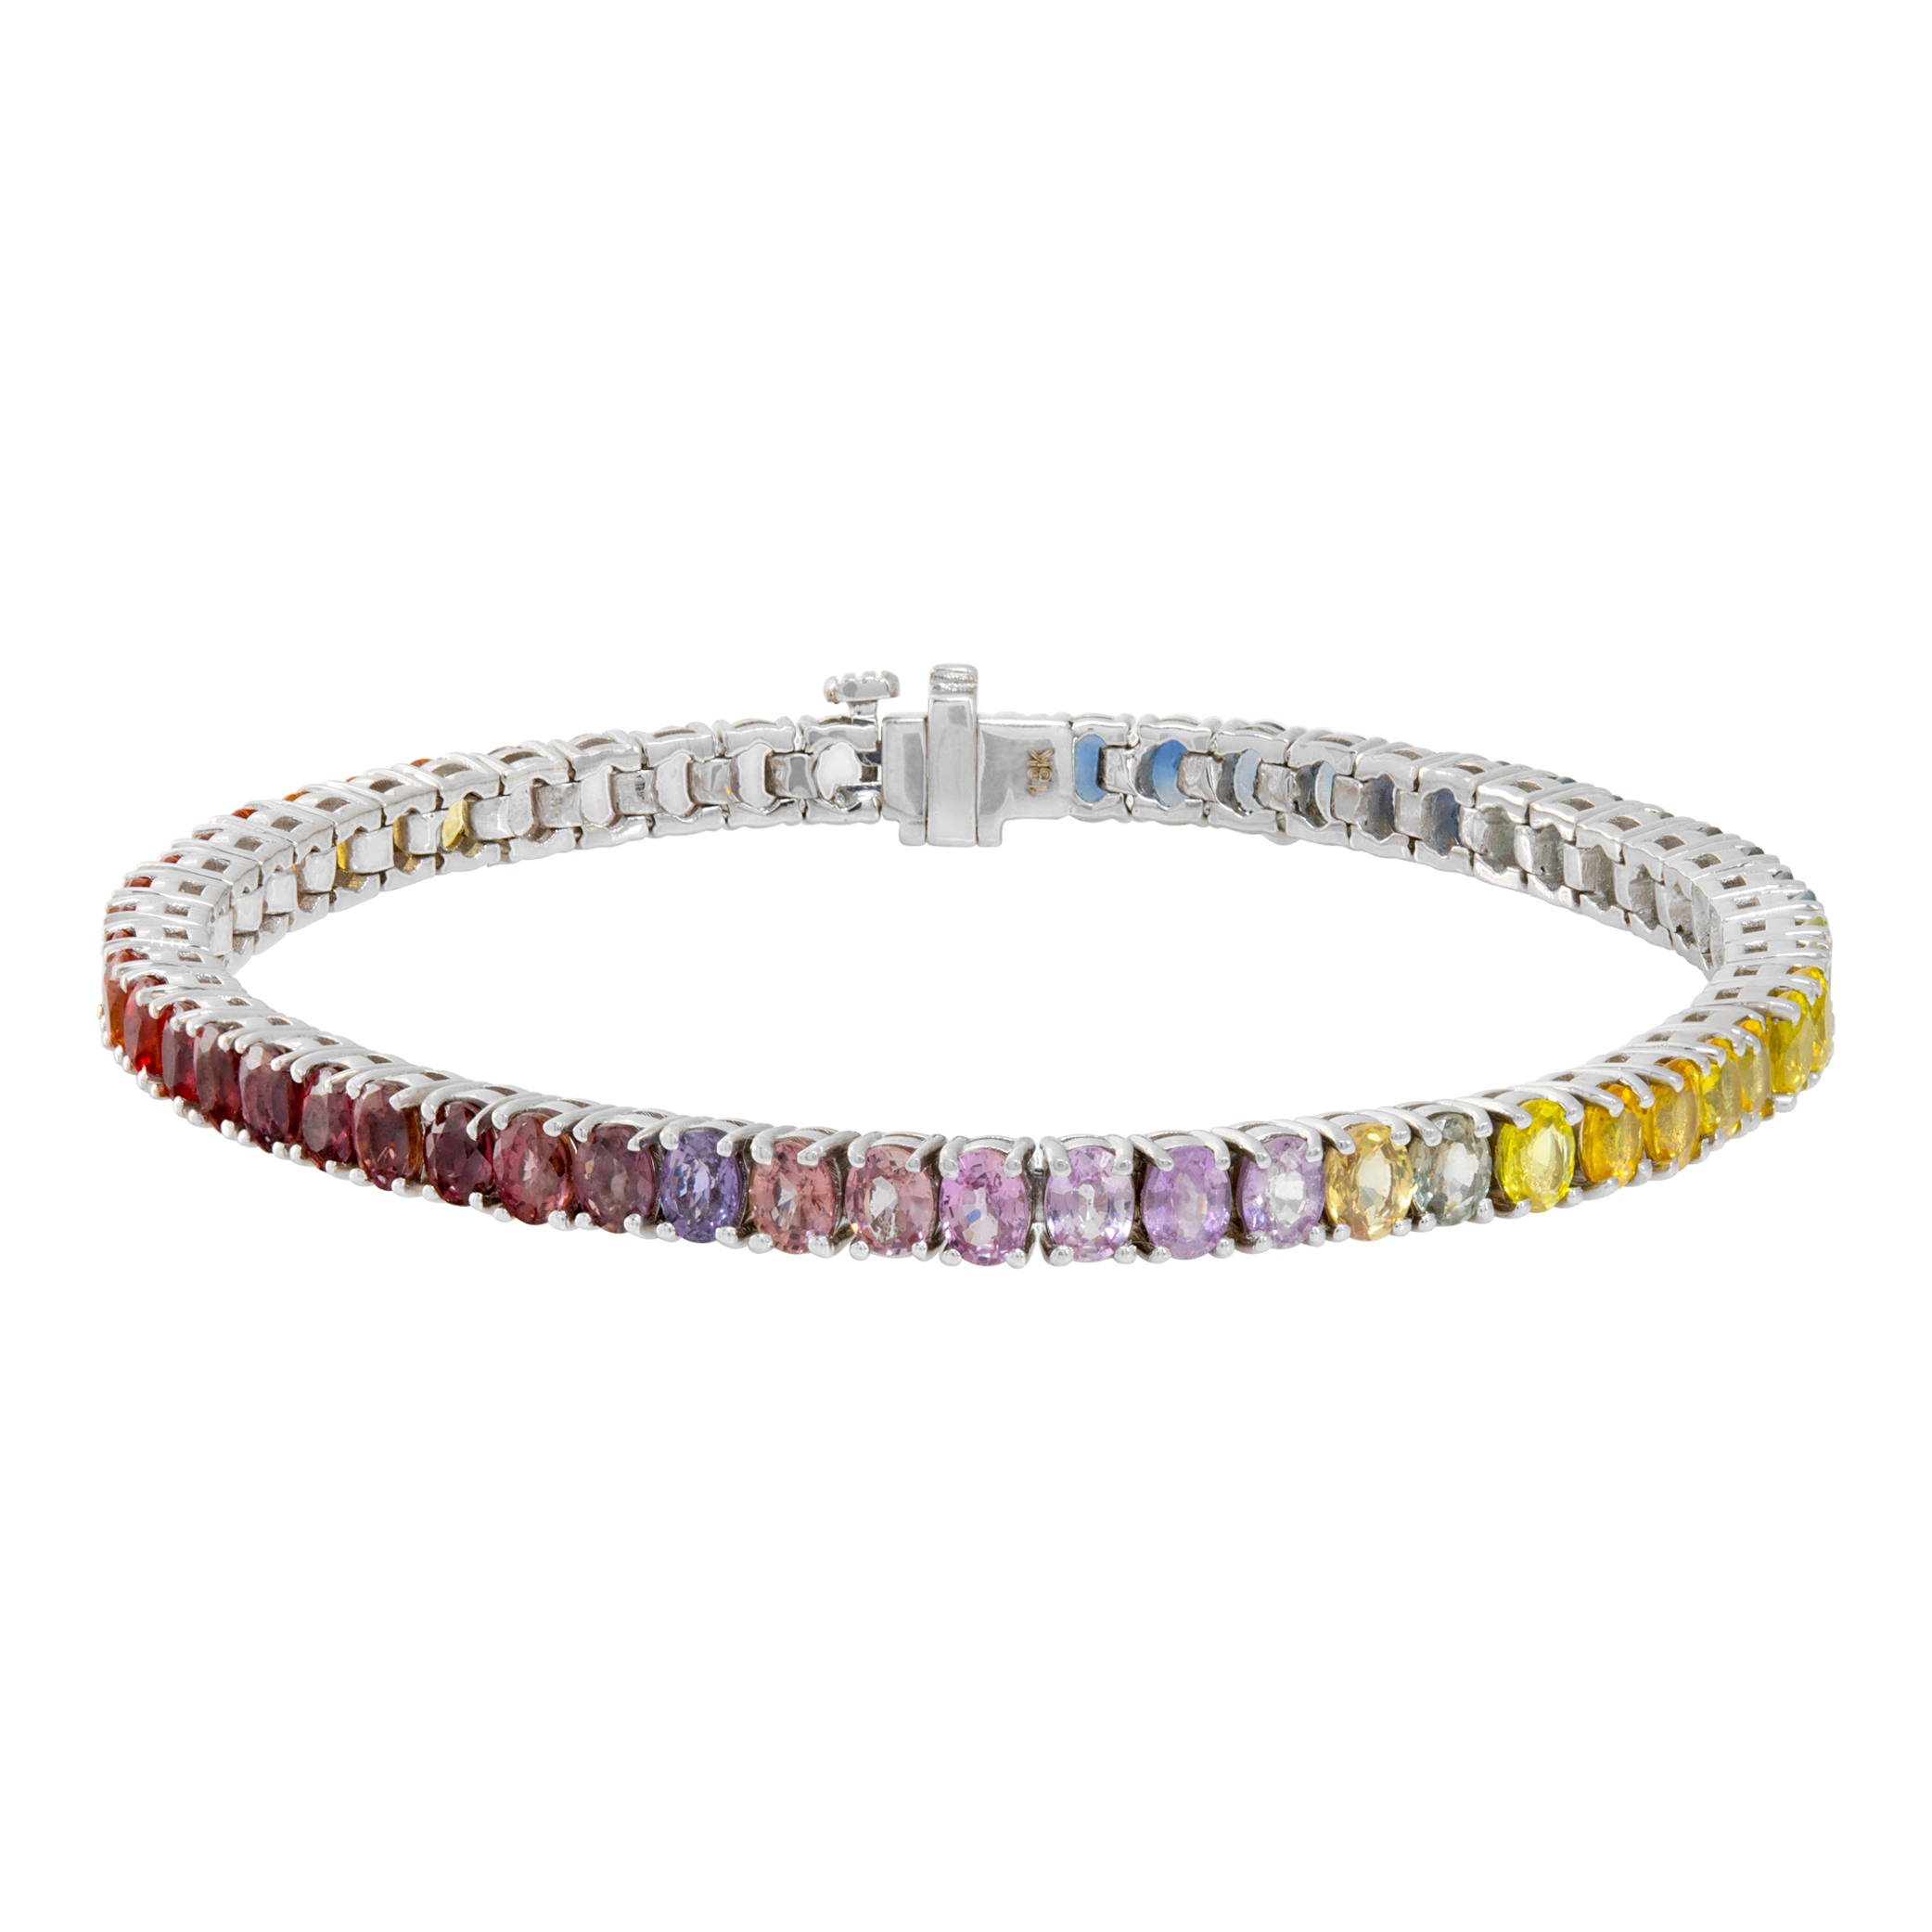 Gradient rainbow sapphire bracelet in 18k white gold, 12.69 carats in sapphires